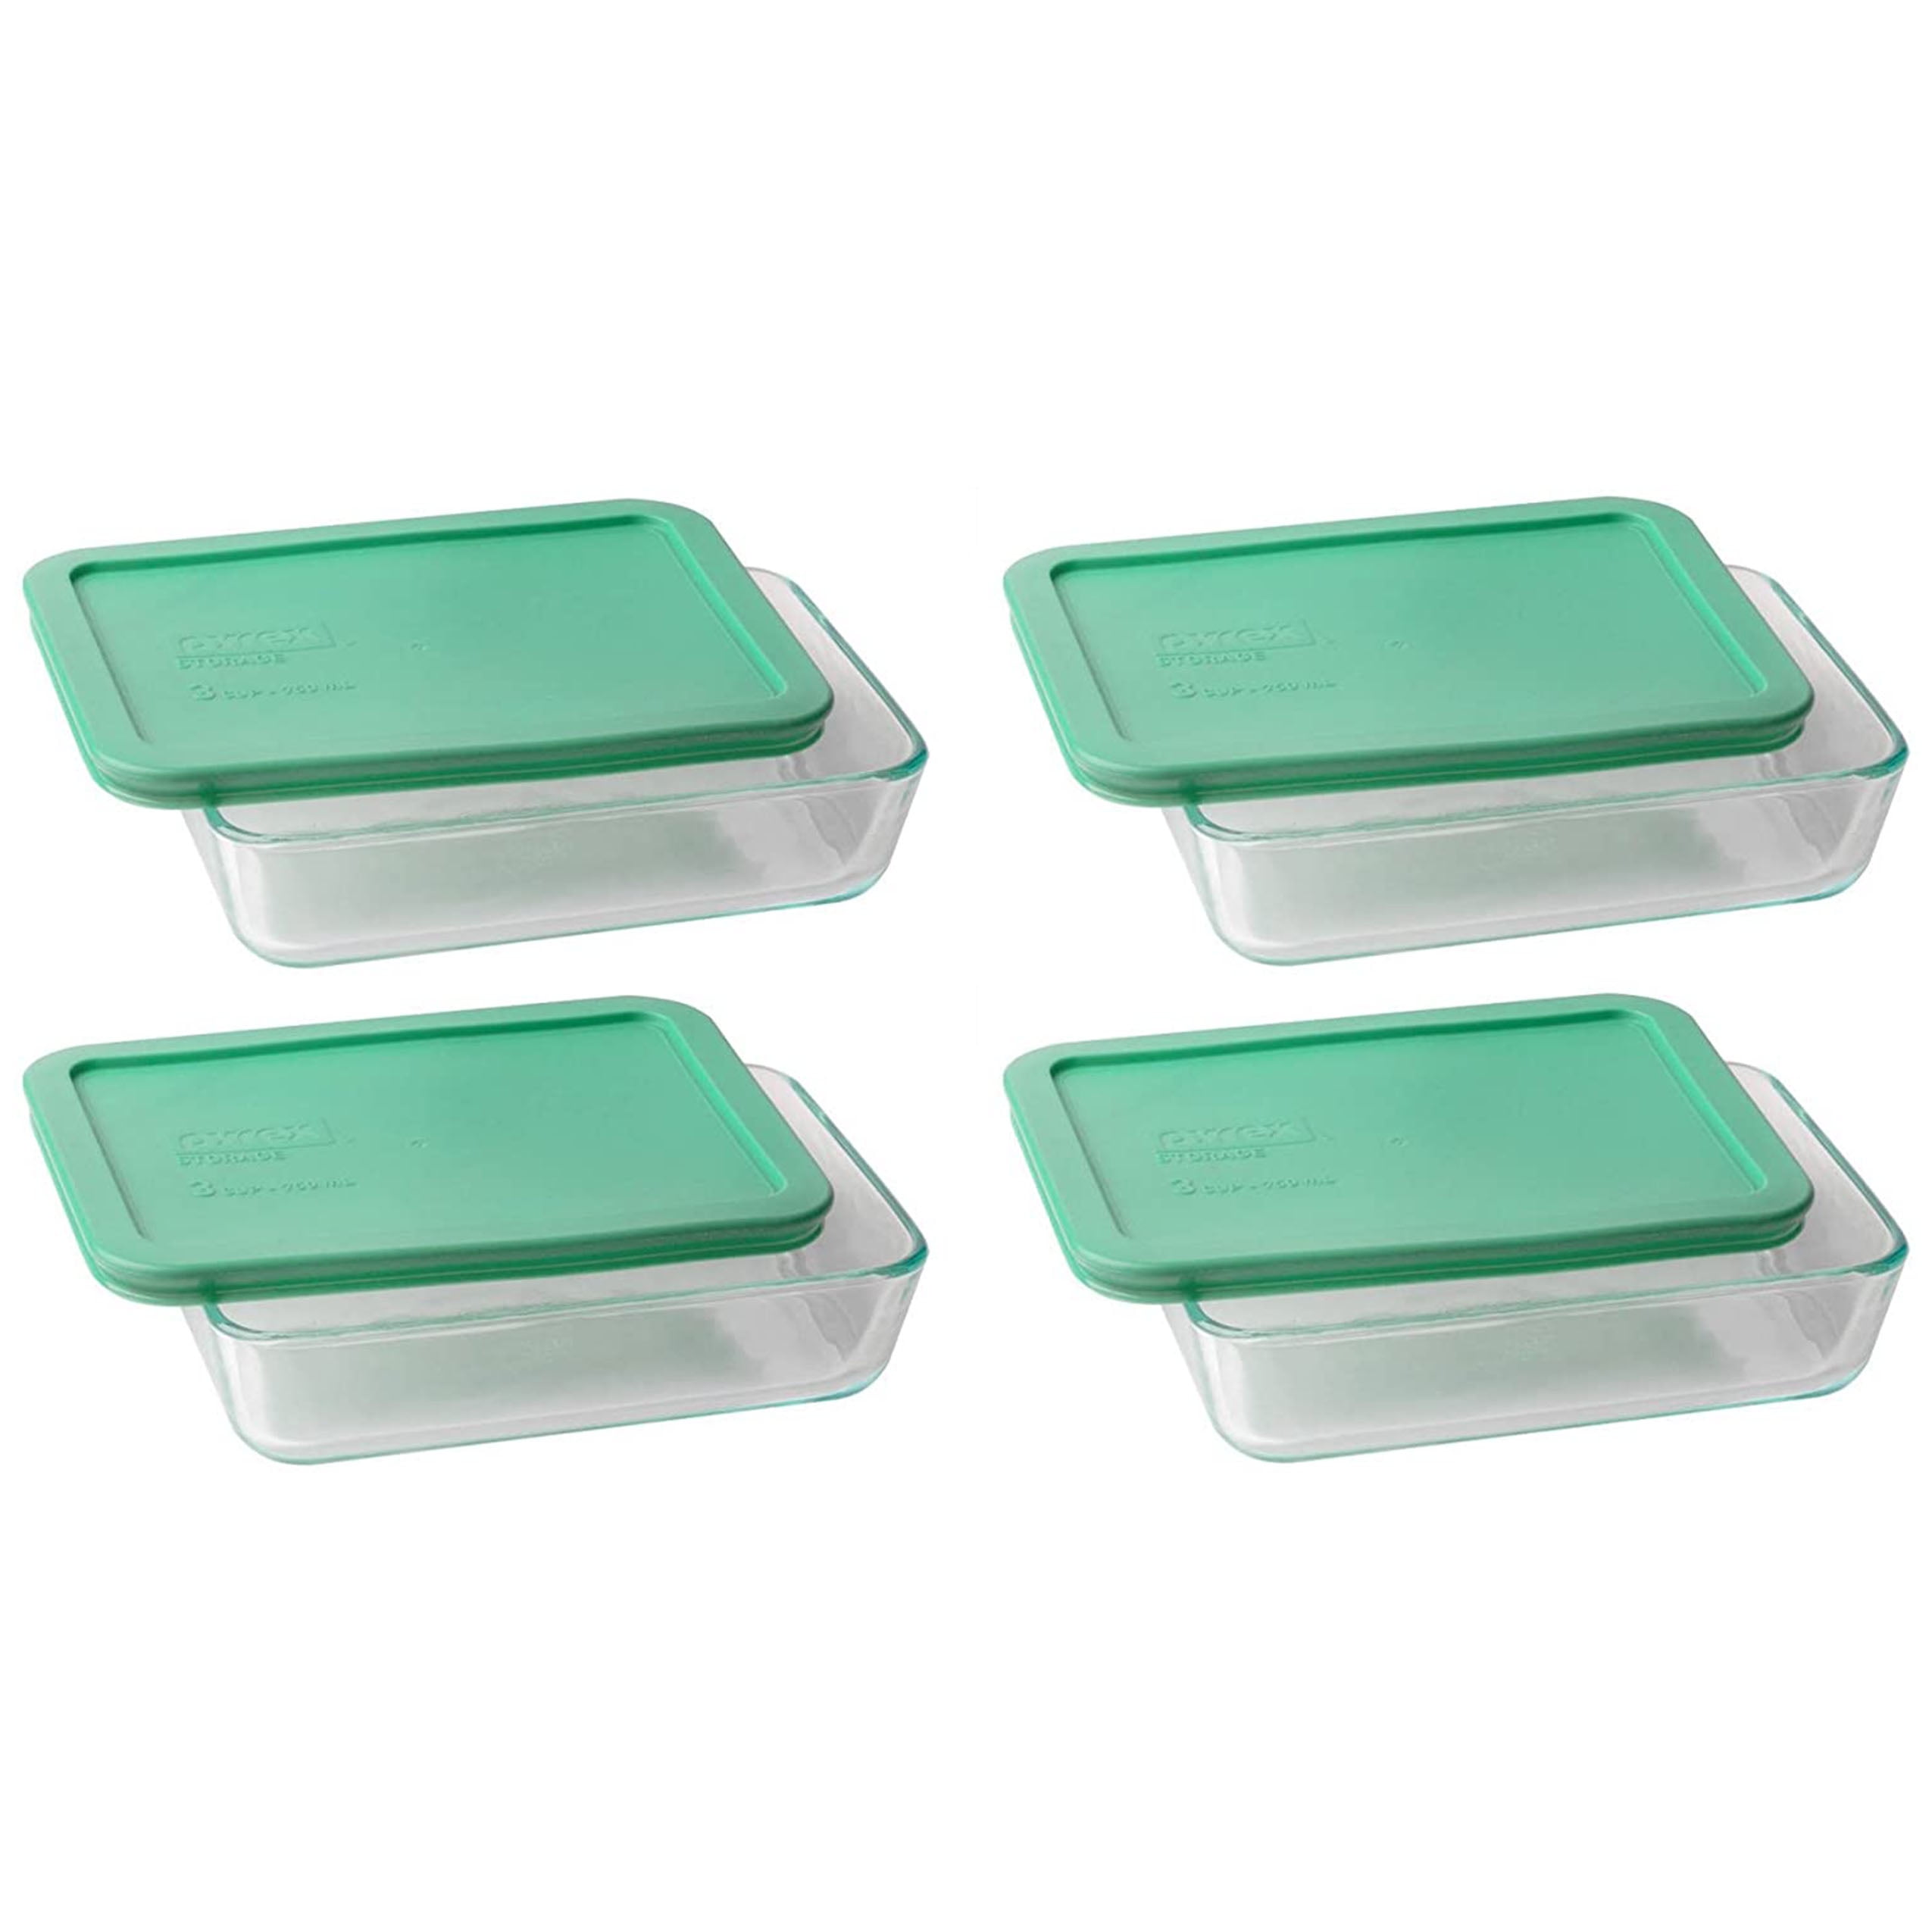 Pyrex 7210 3-Cup Rectangle Glass Food Storage Dishes and 7210-PC 3-Cup  Light Green Lid Covers (4-Pack) 